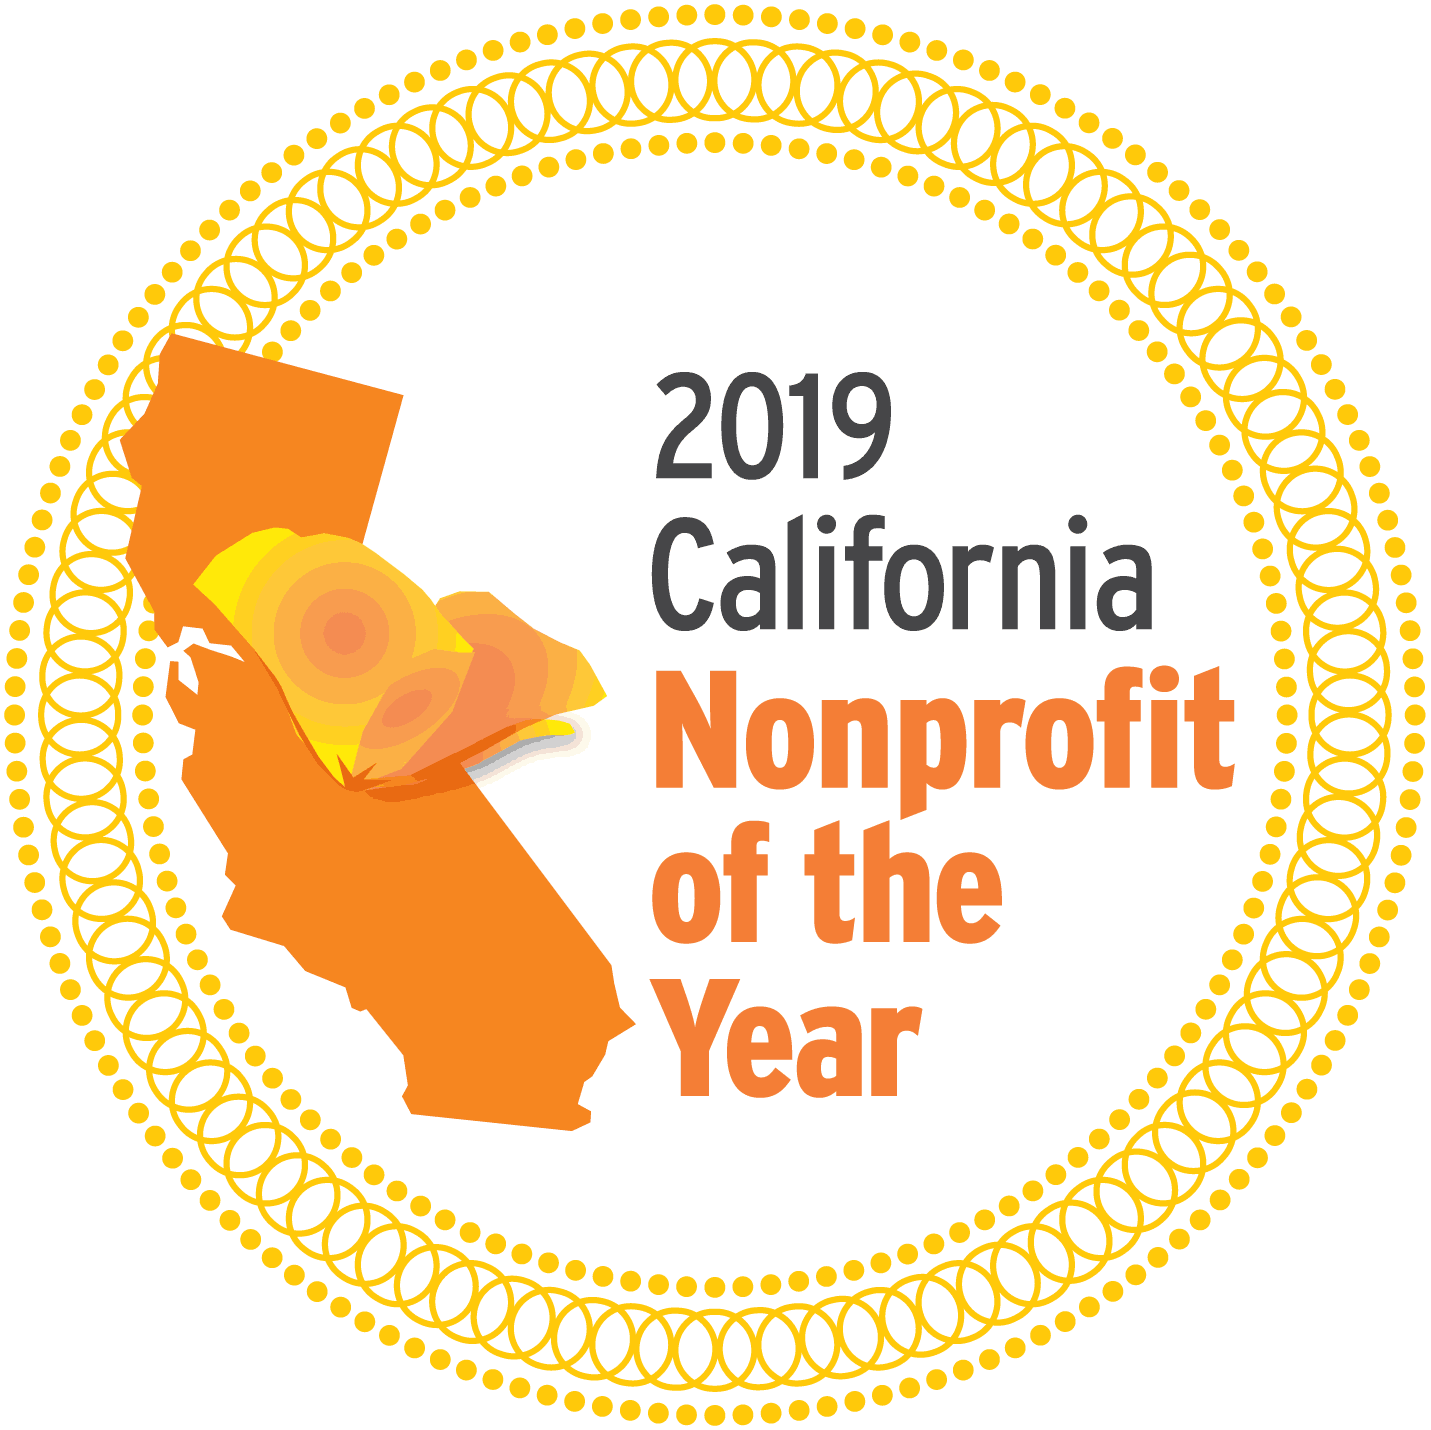 2019 California Nonprofit of the Year